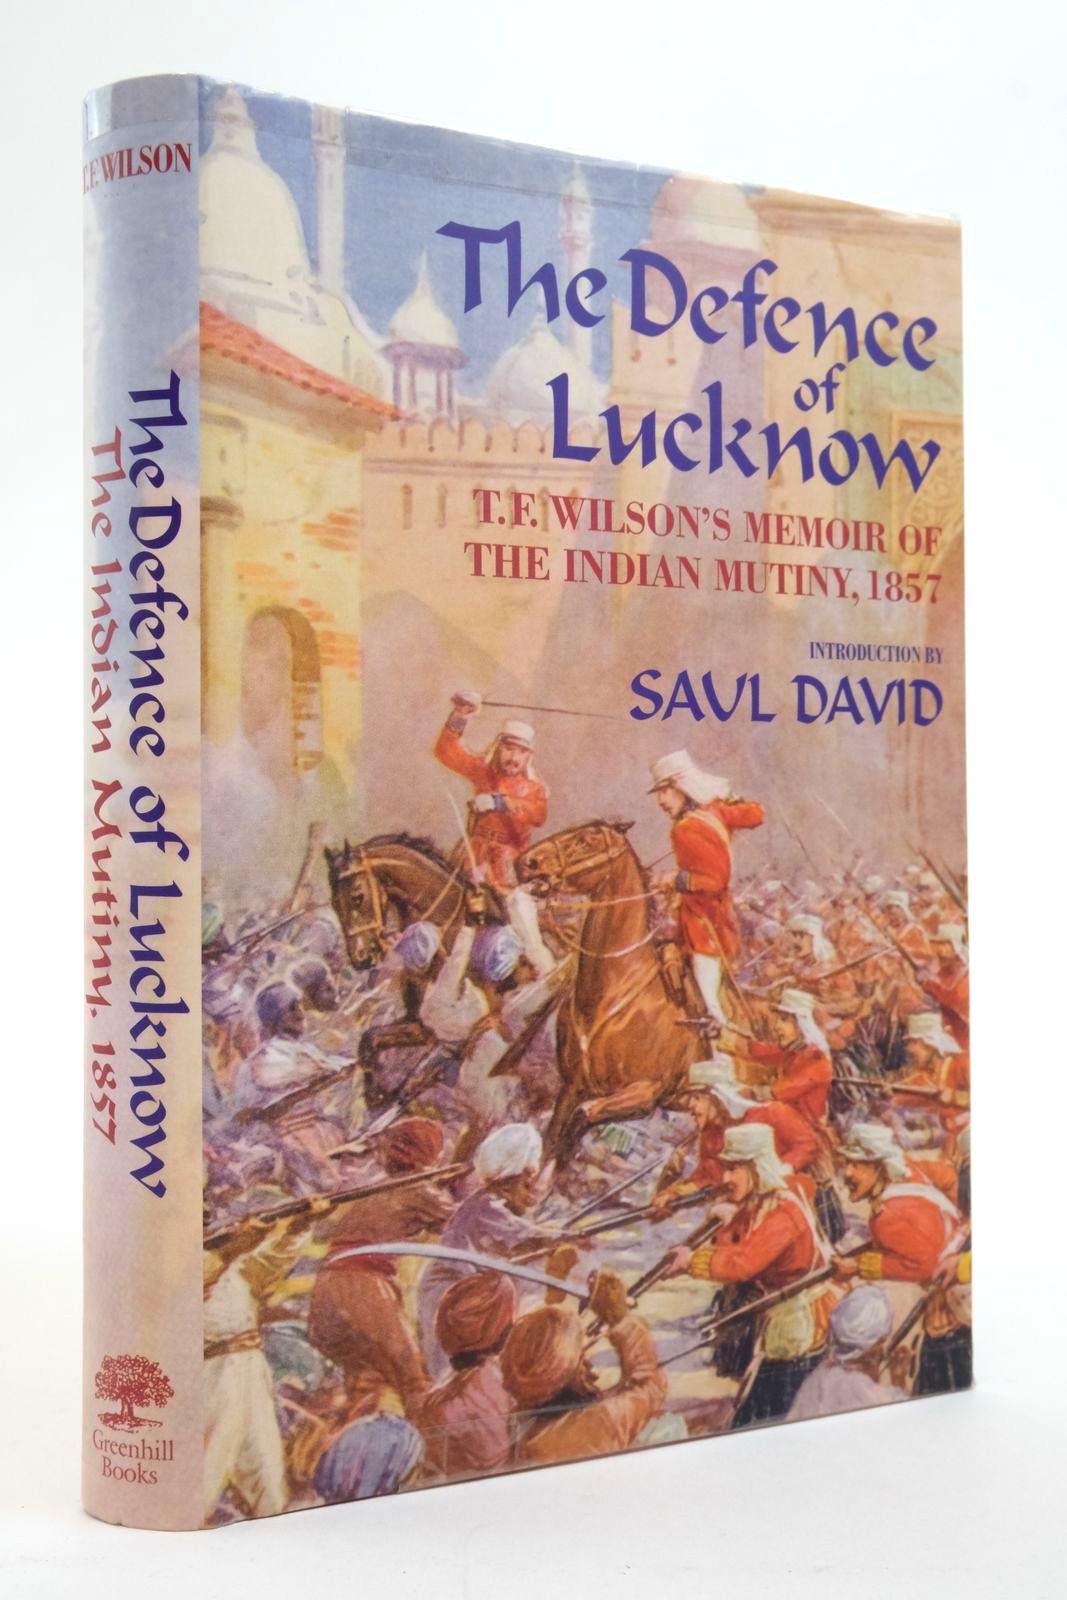 Photo of THE DEFENCE OF LUCKNOW: T.F. WILSON'S MEMOIR OF THE INDIAN MUTINY, 1857 written by Wilson, T.F. David, Saul published by Greenhill Books (STOCK CODE: 2138559)  for sale by Stella & Rose's Books